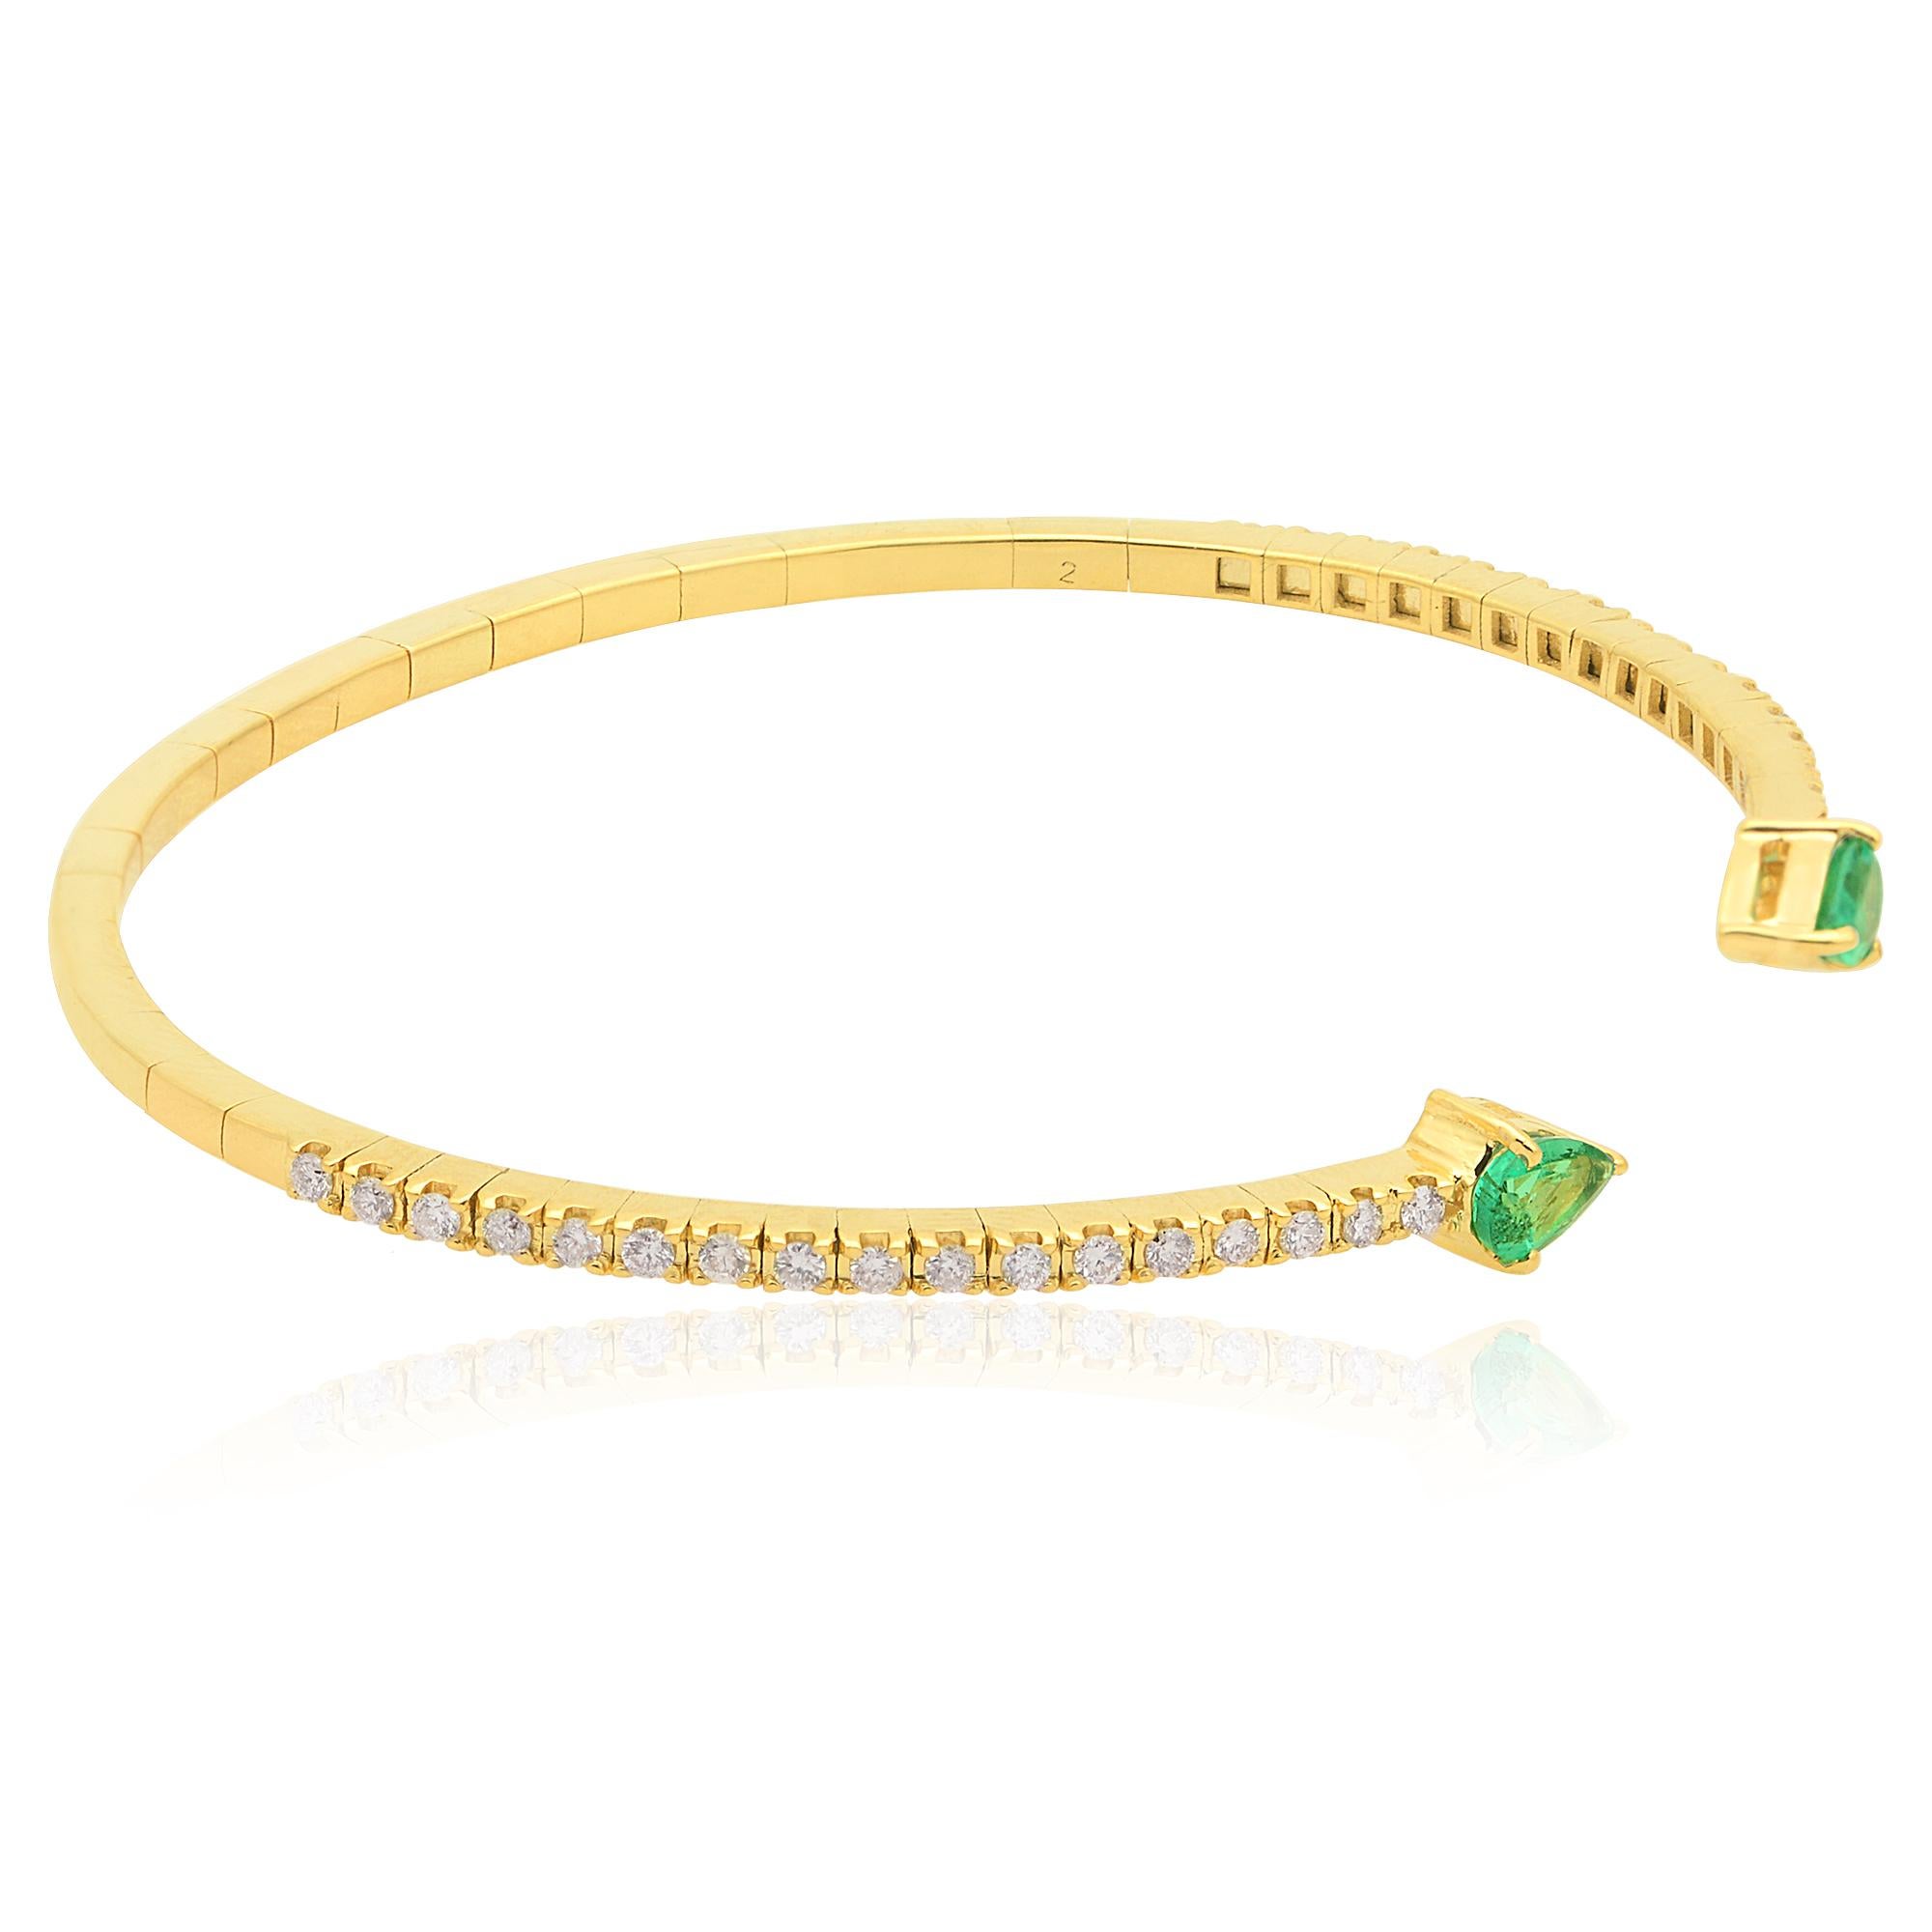 The centerpiece of this cuff bangle bracelet is a captivating pear-shaped emerald gemstone. The emerald showcases its rich green color, known for its mesmerizing beauty and symbolizing nature's vitality. The pear shape adds a touch of uniqueness and